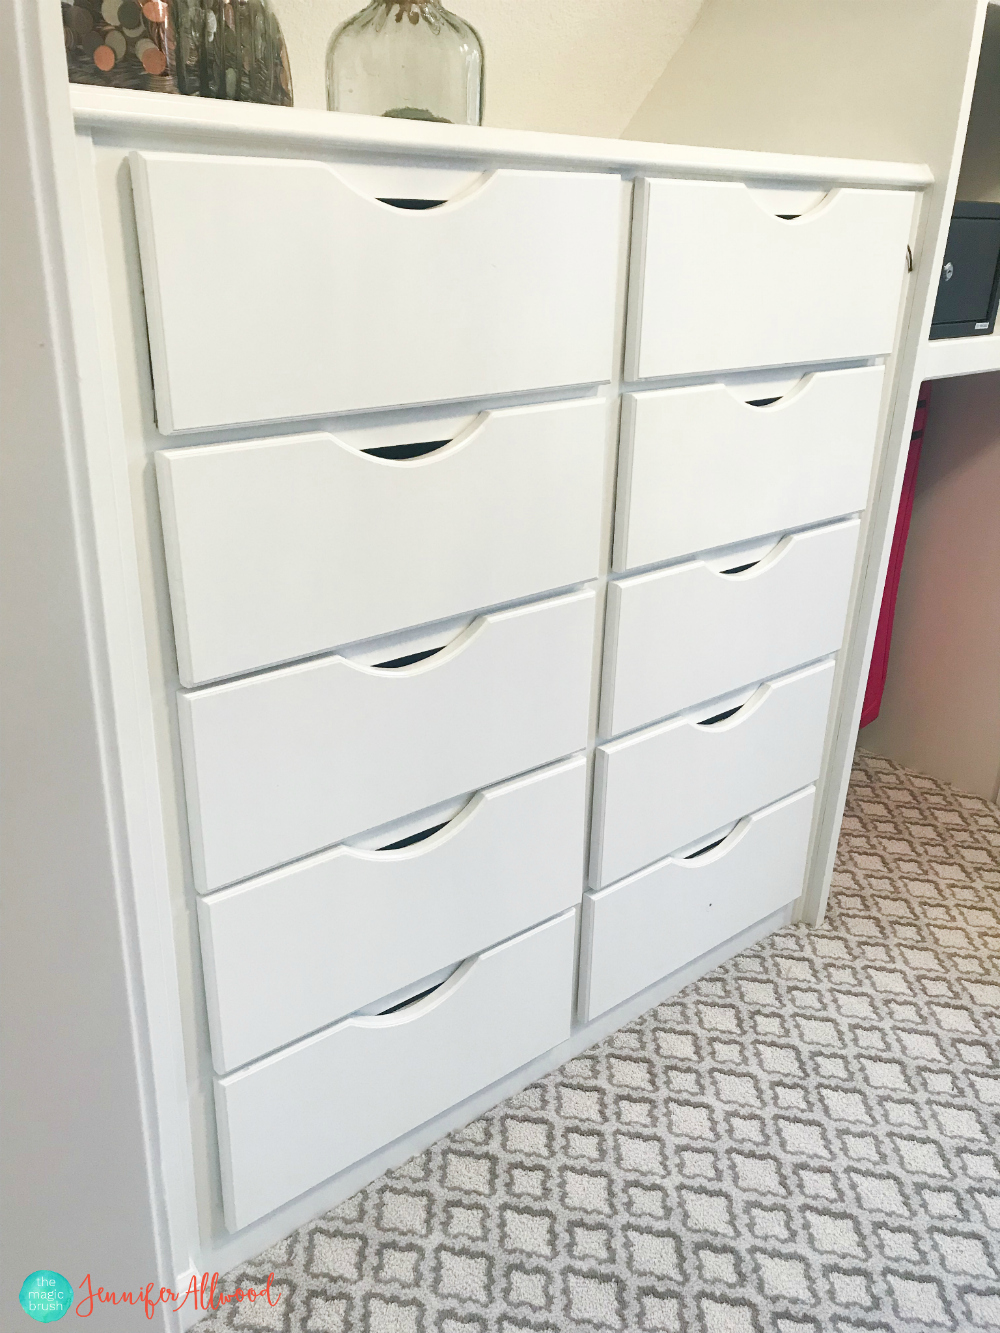 How to get Centered Drawer Knobs Every time